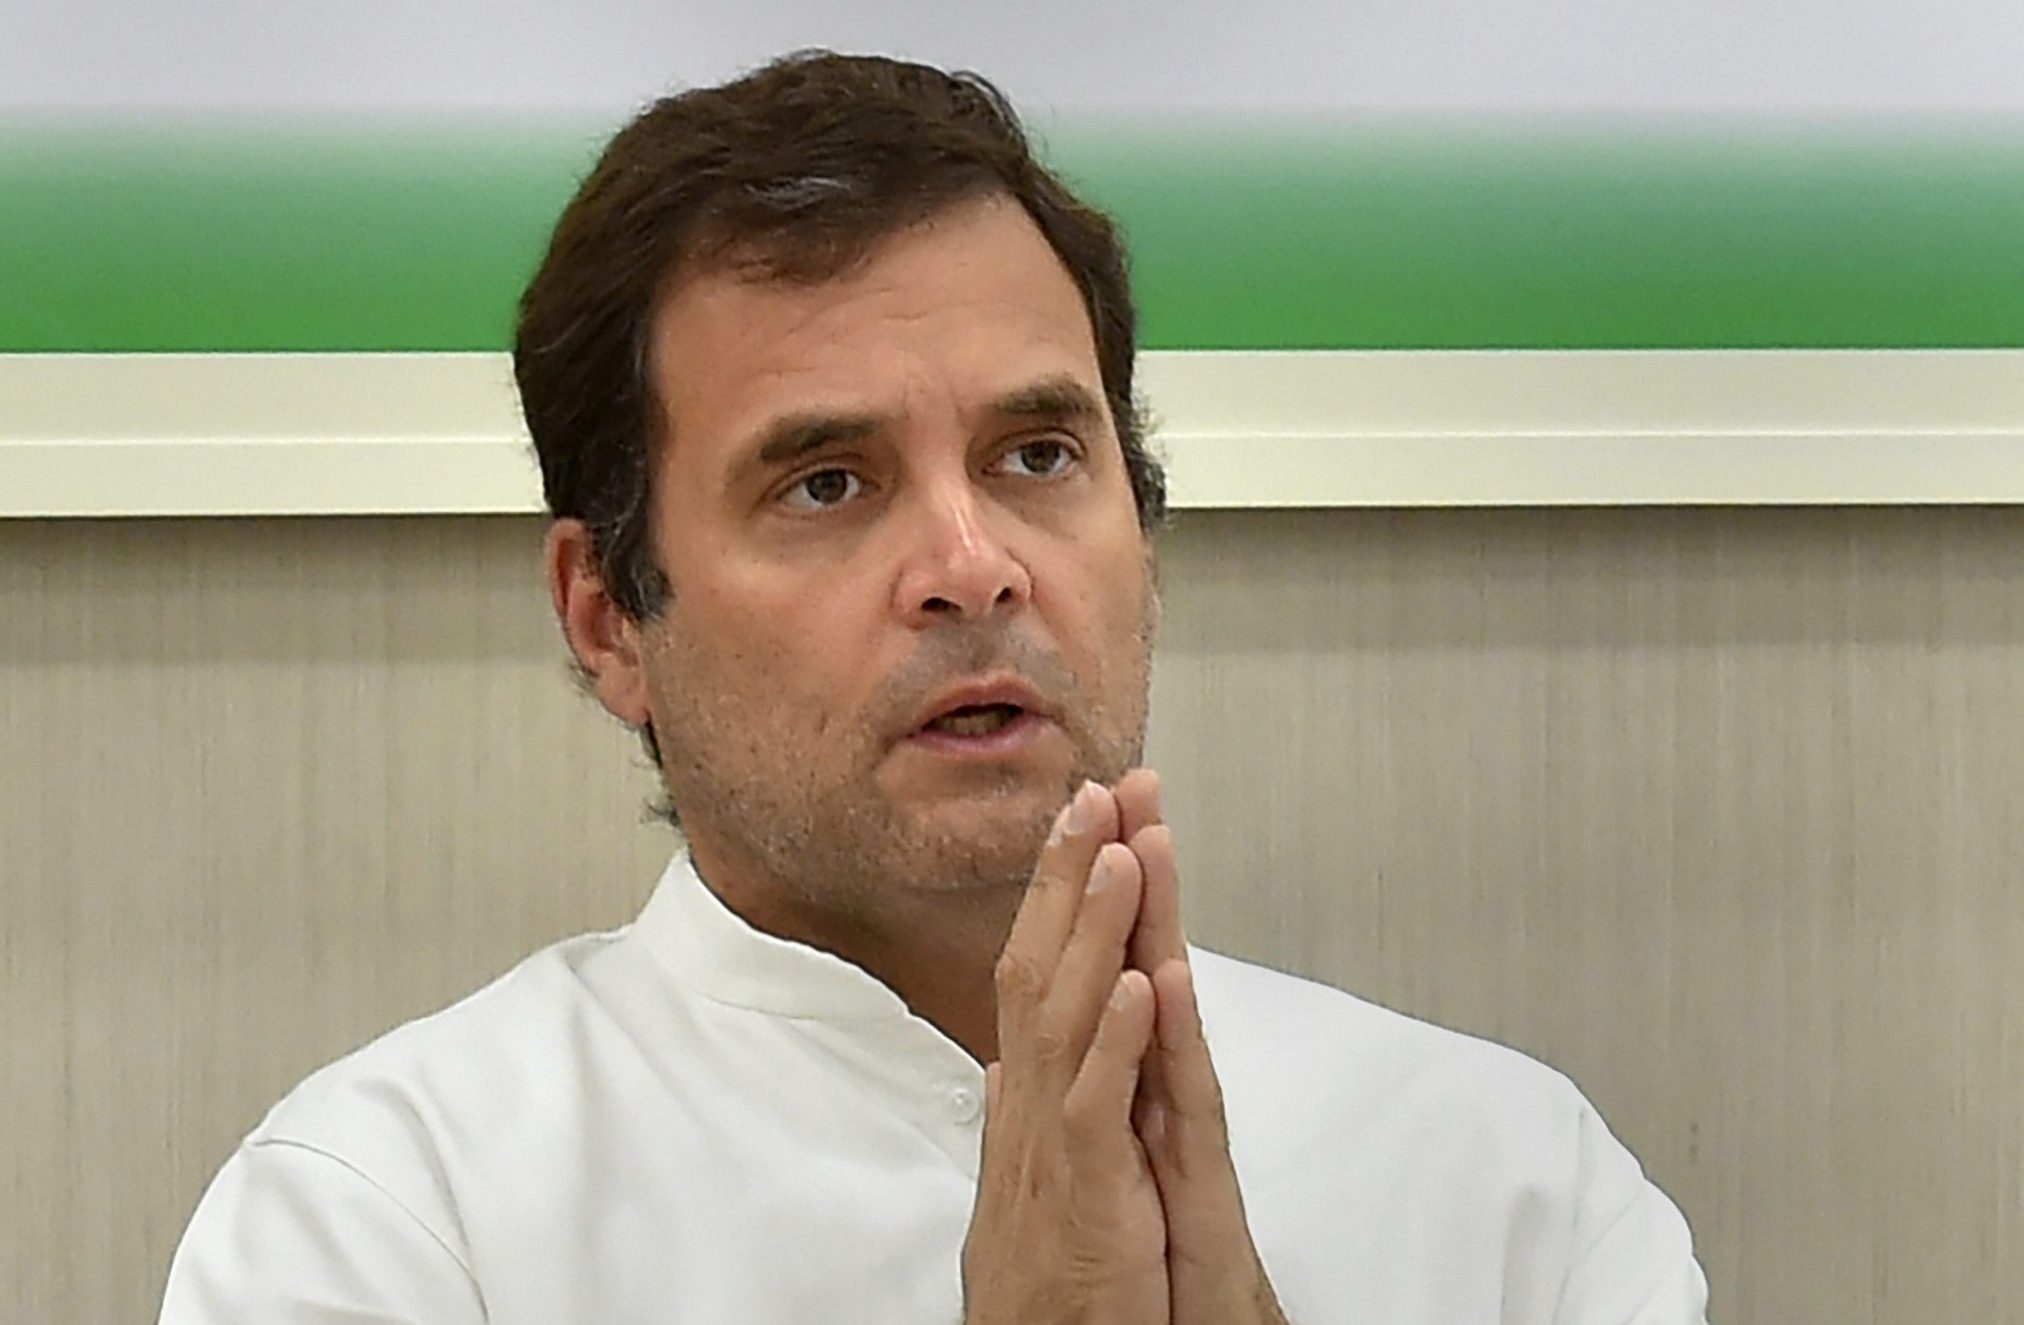 Accept invite to visit J&K without any conditions, when can I come, asks Rahul